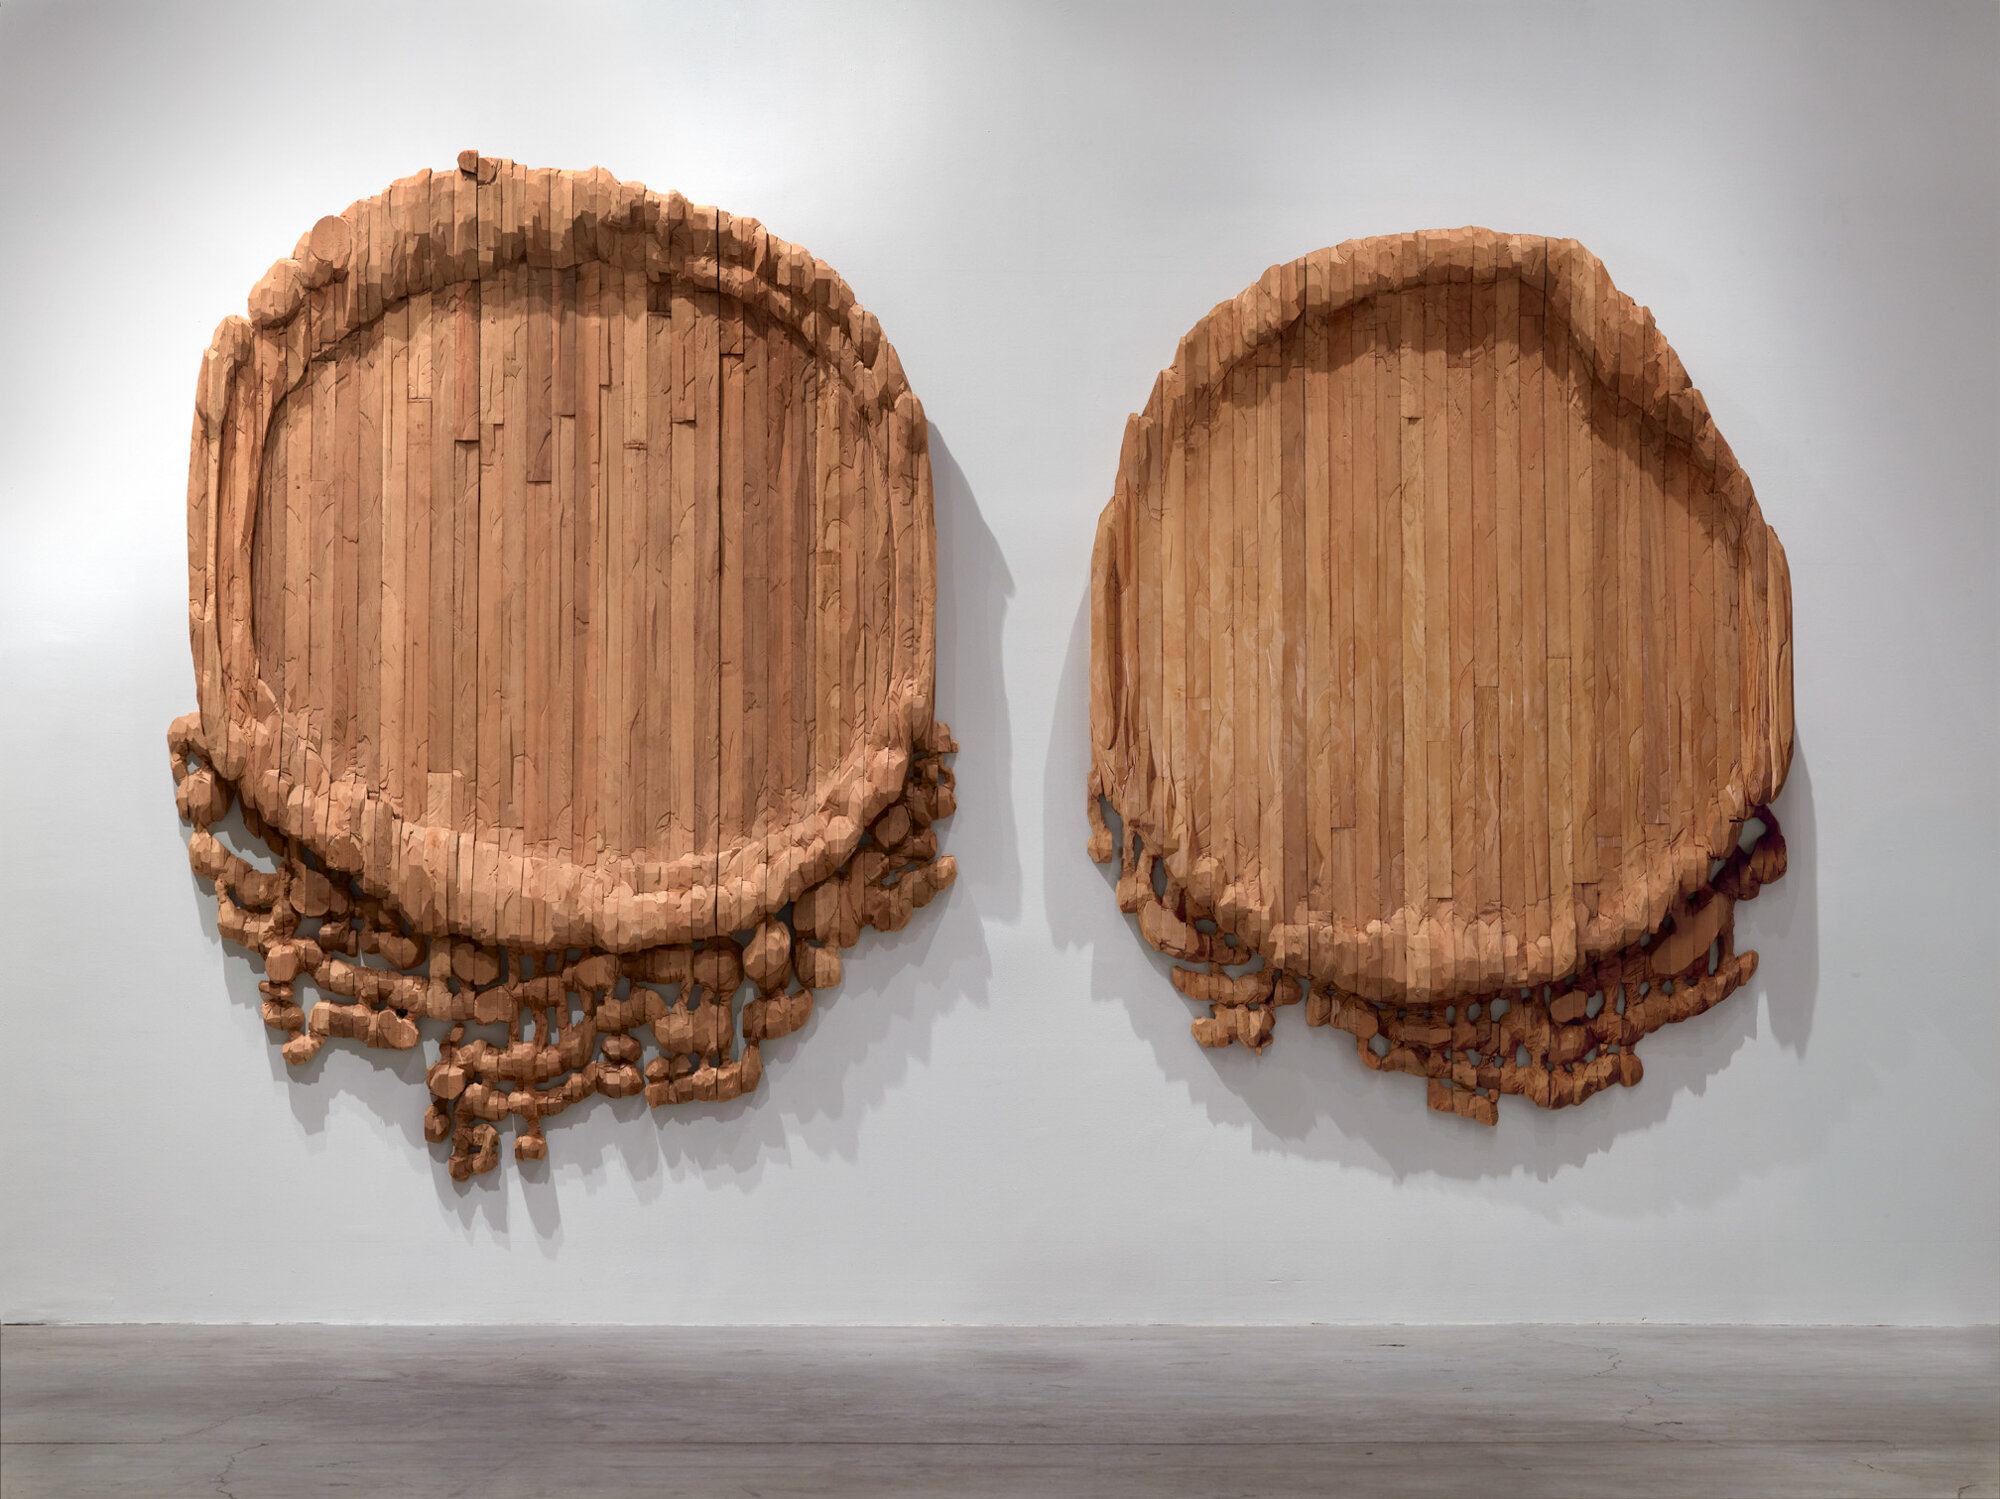       Weeping Plates , 2005 Cedar Left: 12.2 x 9.6 x 6.5 in. Right: 10.8 x 8.5″ x 8 in.    MORE IMAGES   Galerie Lelong &amp; Co.   deCordova Sculpture Park and Museum  